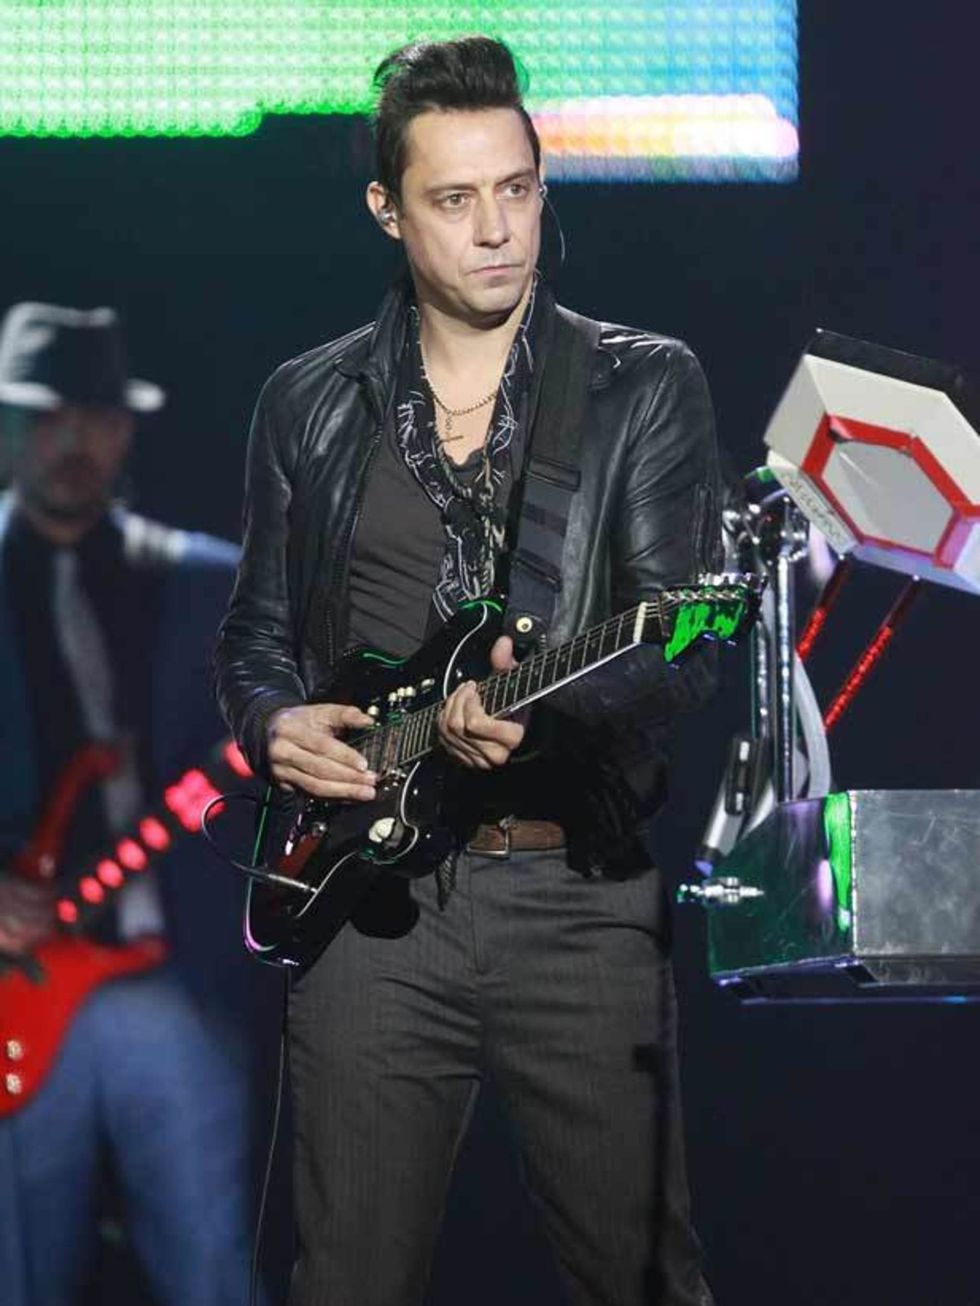 <p><a href="http://www.elleuk.com/starstyle/red-carpet/%28section%29/british-fashion-awards-2009/%28offset%29/0/%28img%29/451849">Jamie Hince</a> performs at the Etam Spring/Summer 2011 collection launch at Grand Palais in Paris, 24 January 2011 </p>